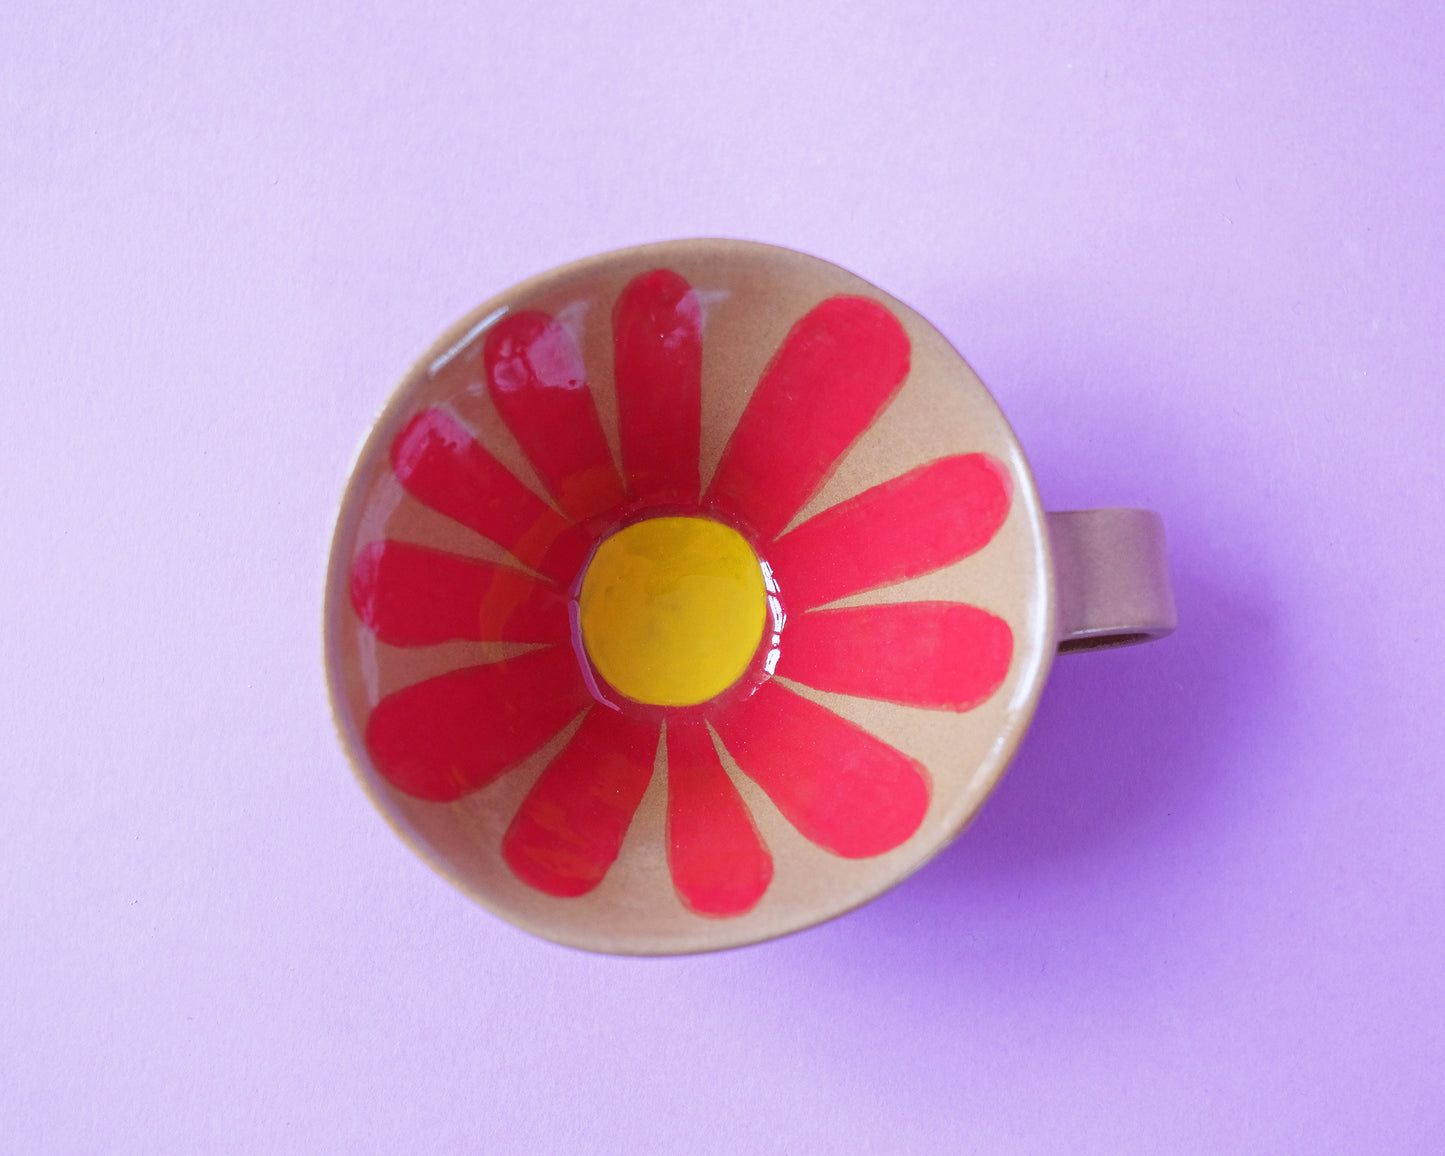 Coffee Cup with a red flower